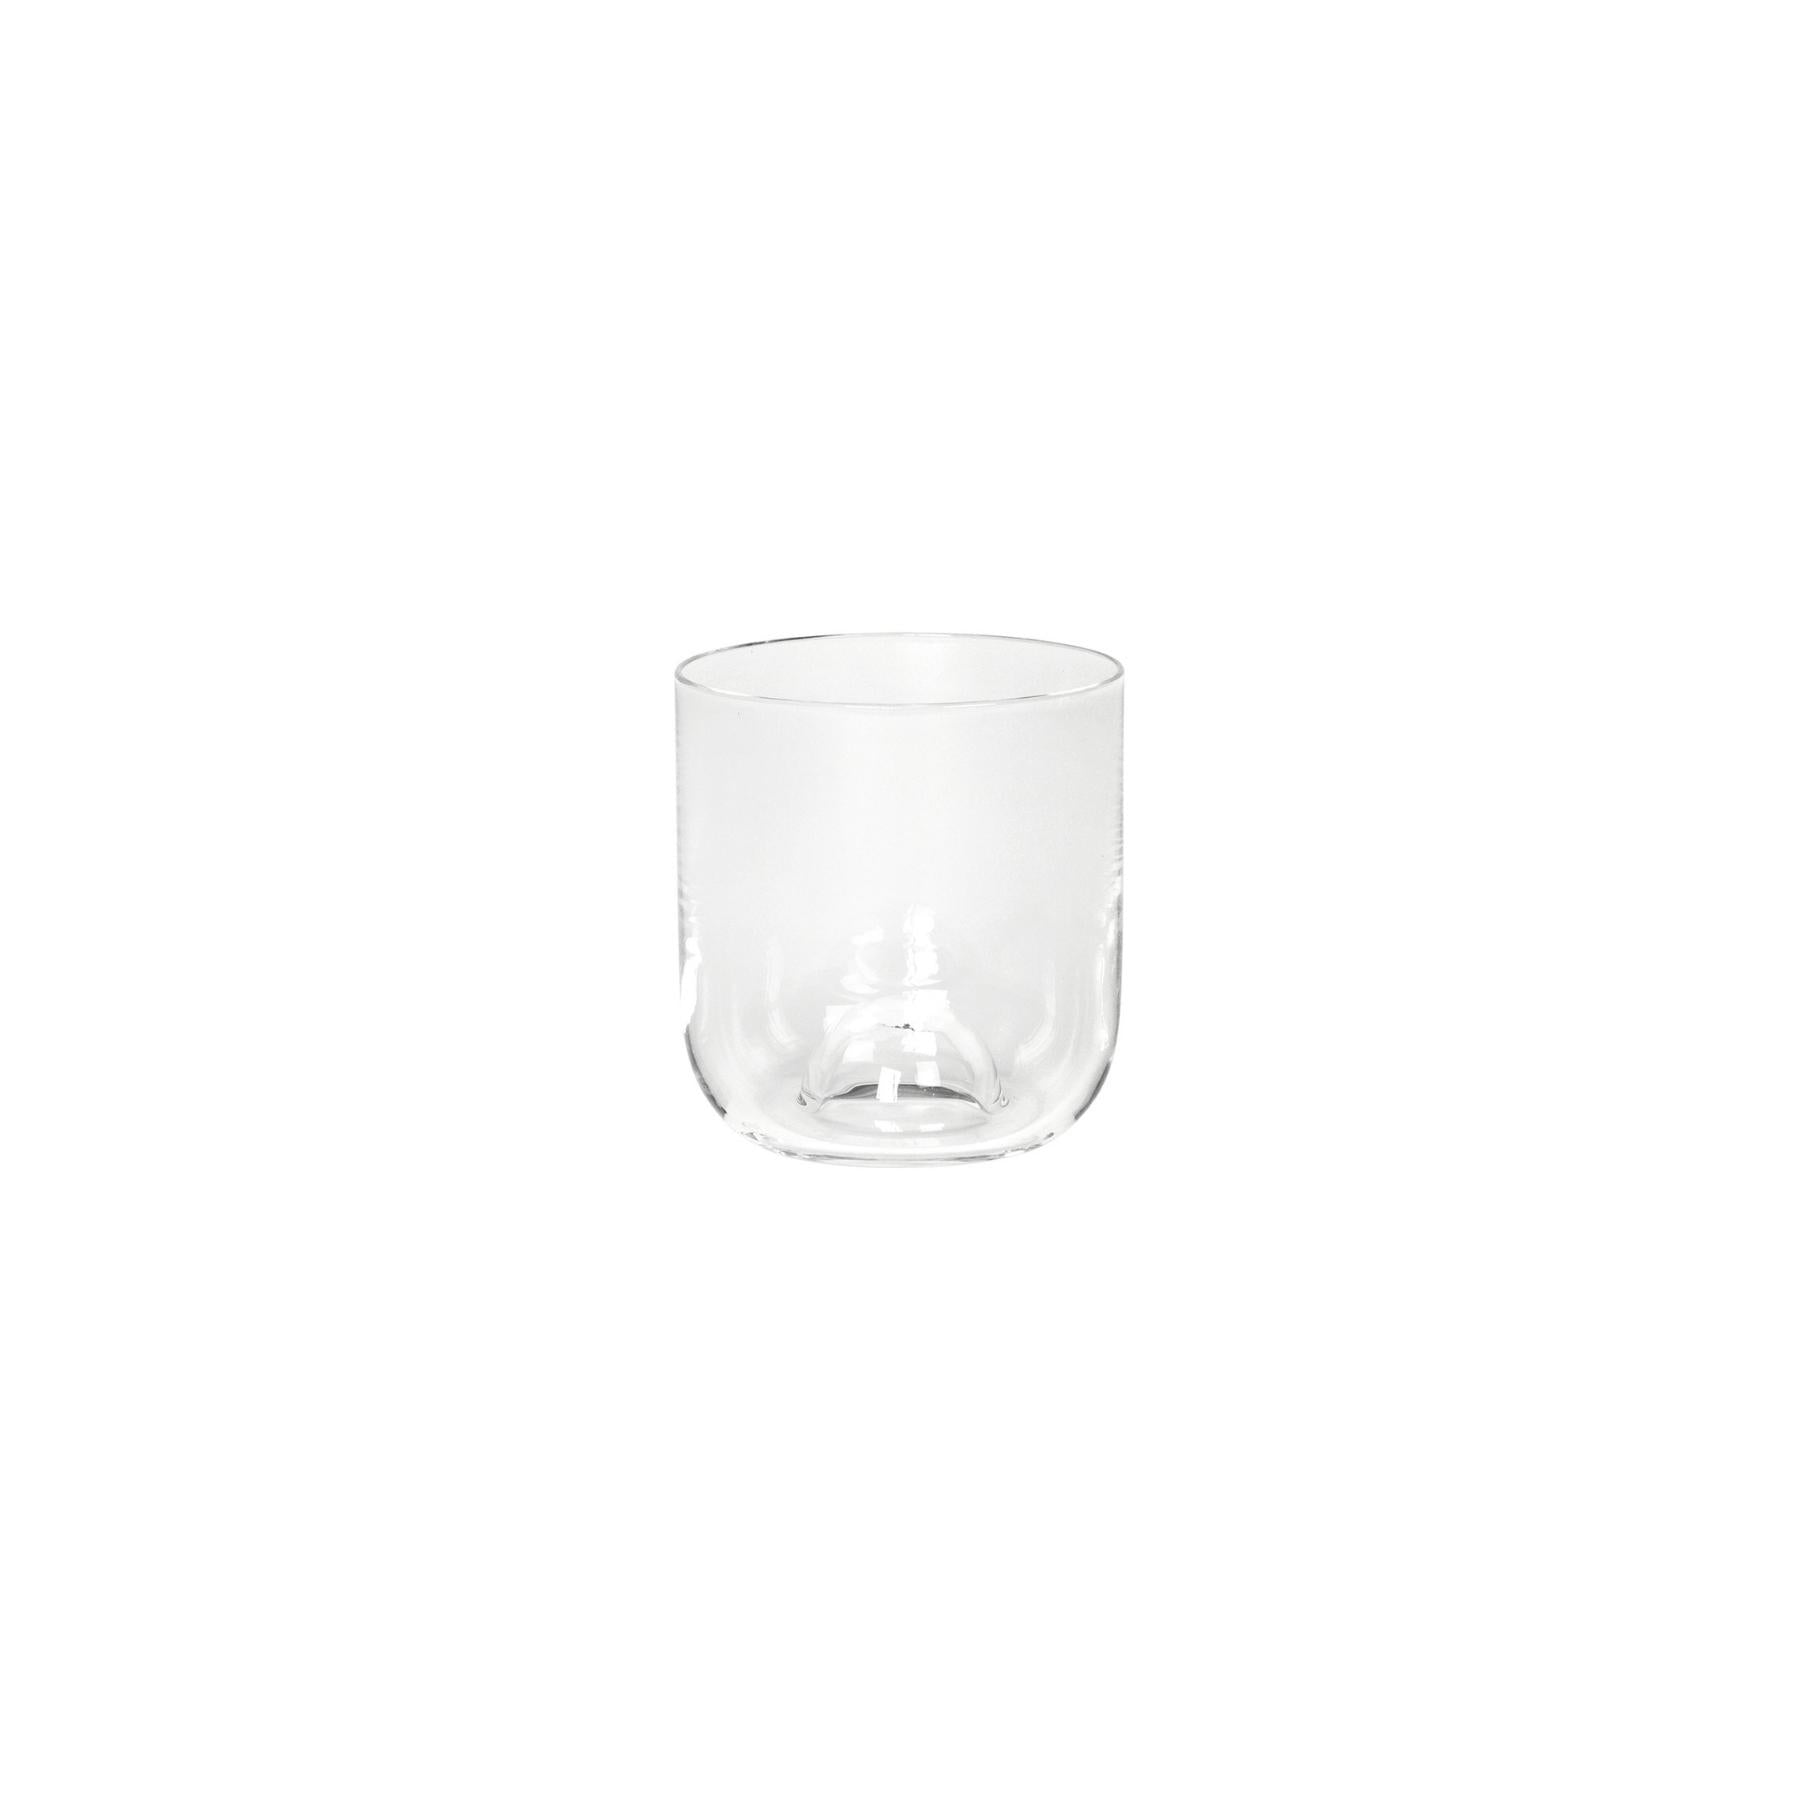 Capsule Drinking Glass - Small - Set of 4 - THAT COOL LIVING